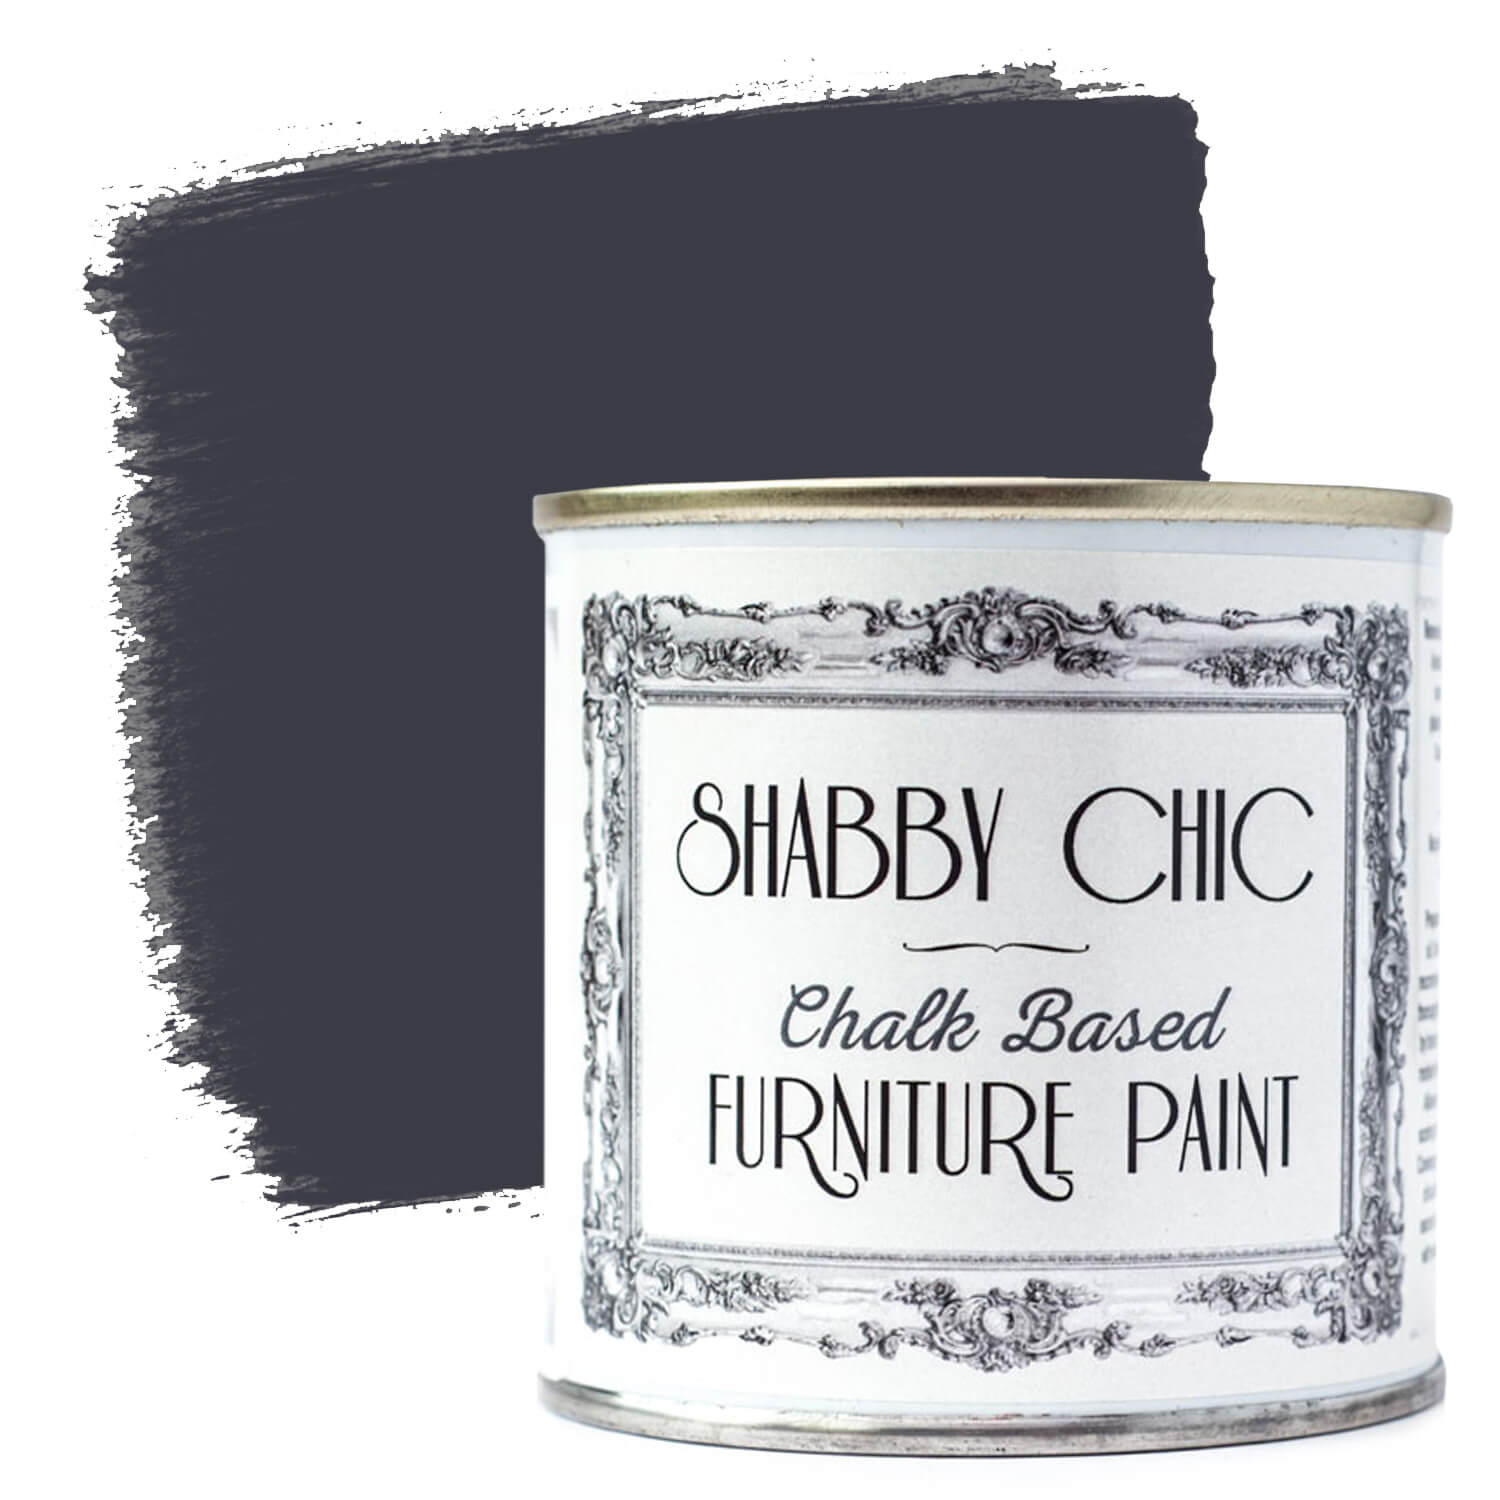 Shabby Chic Furniture Paint in Anthracite